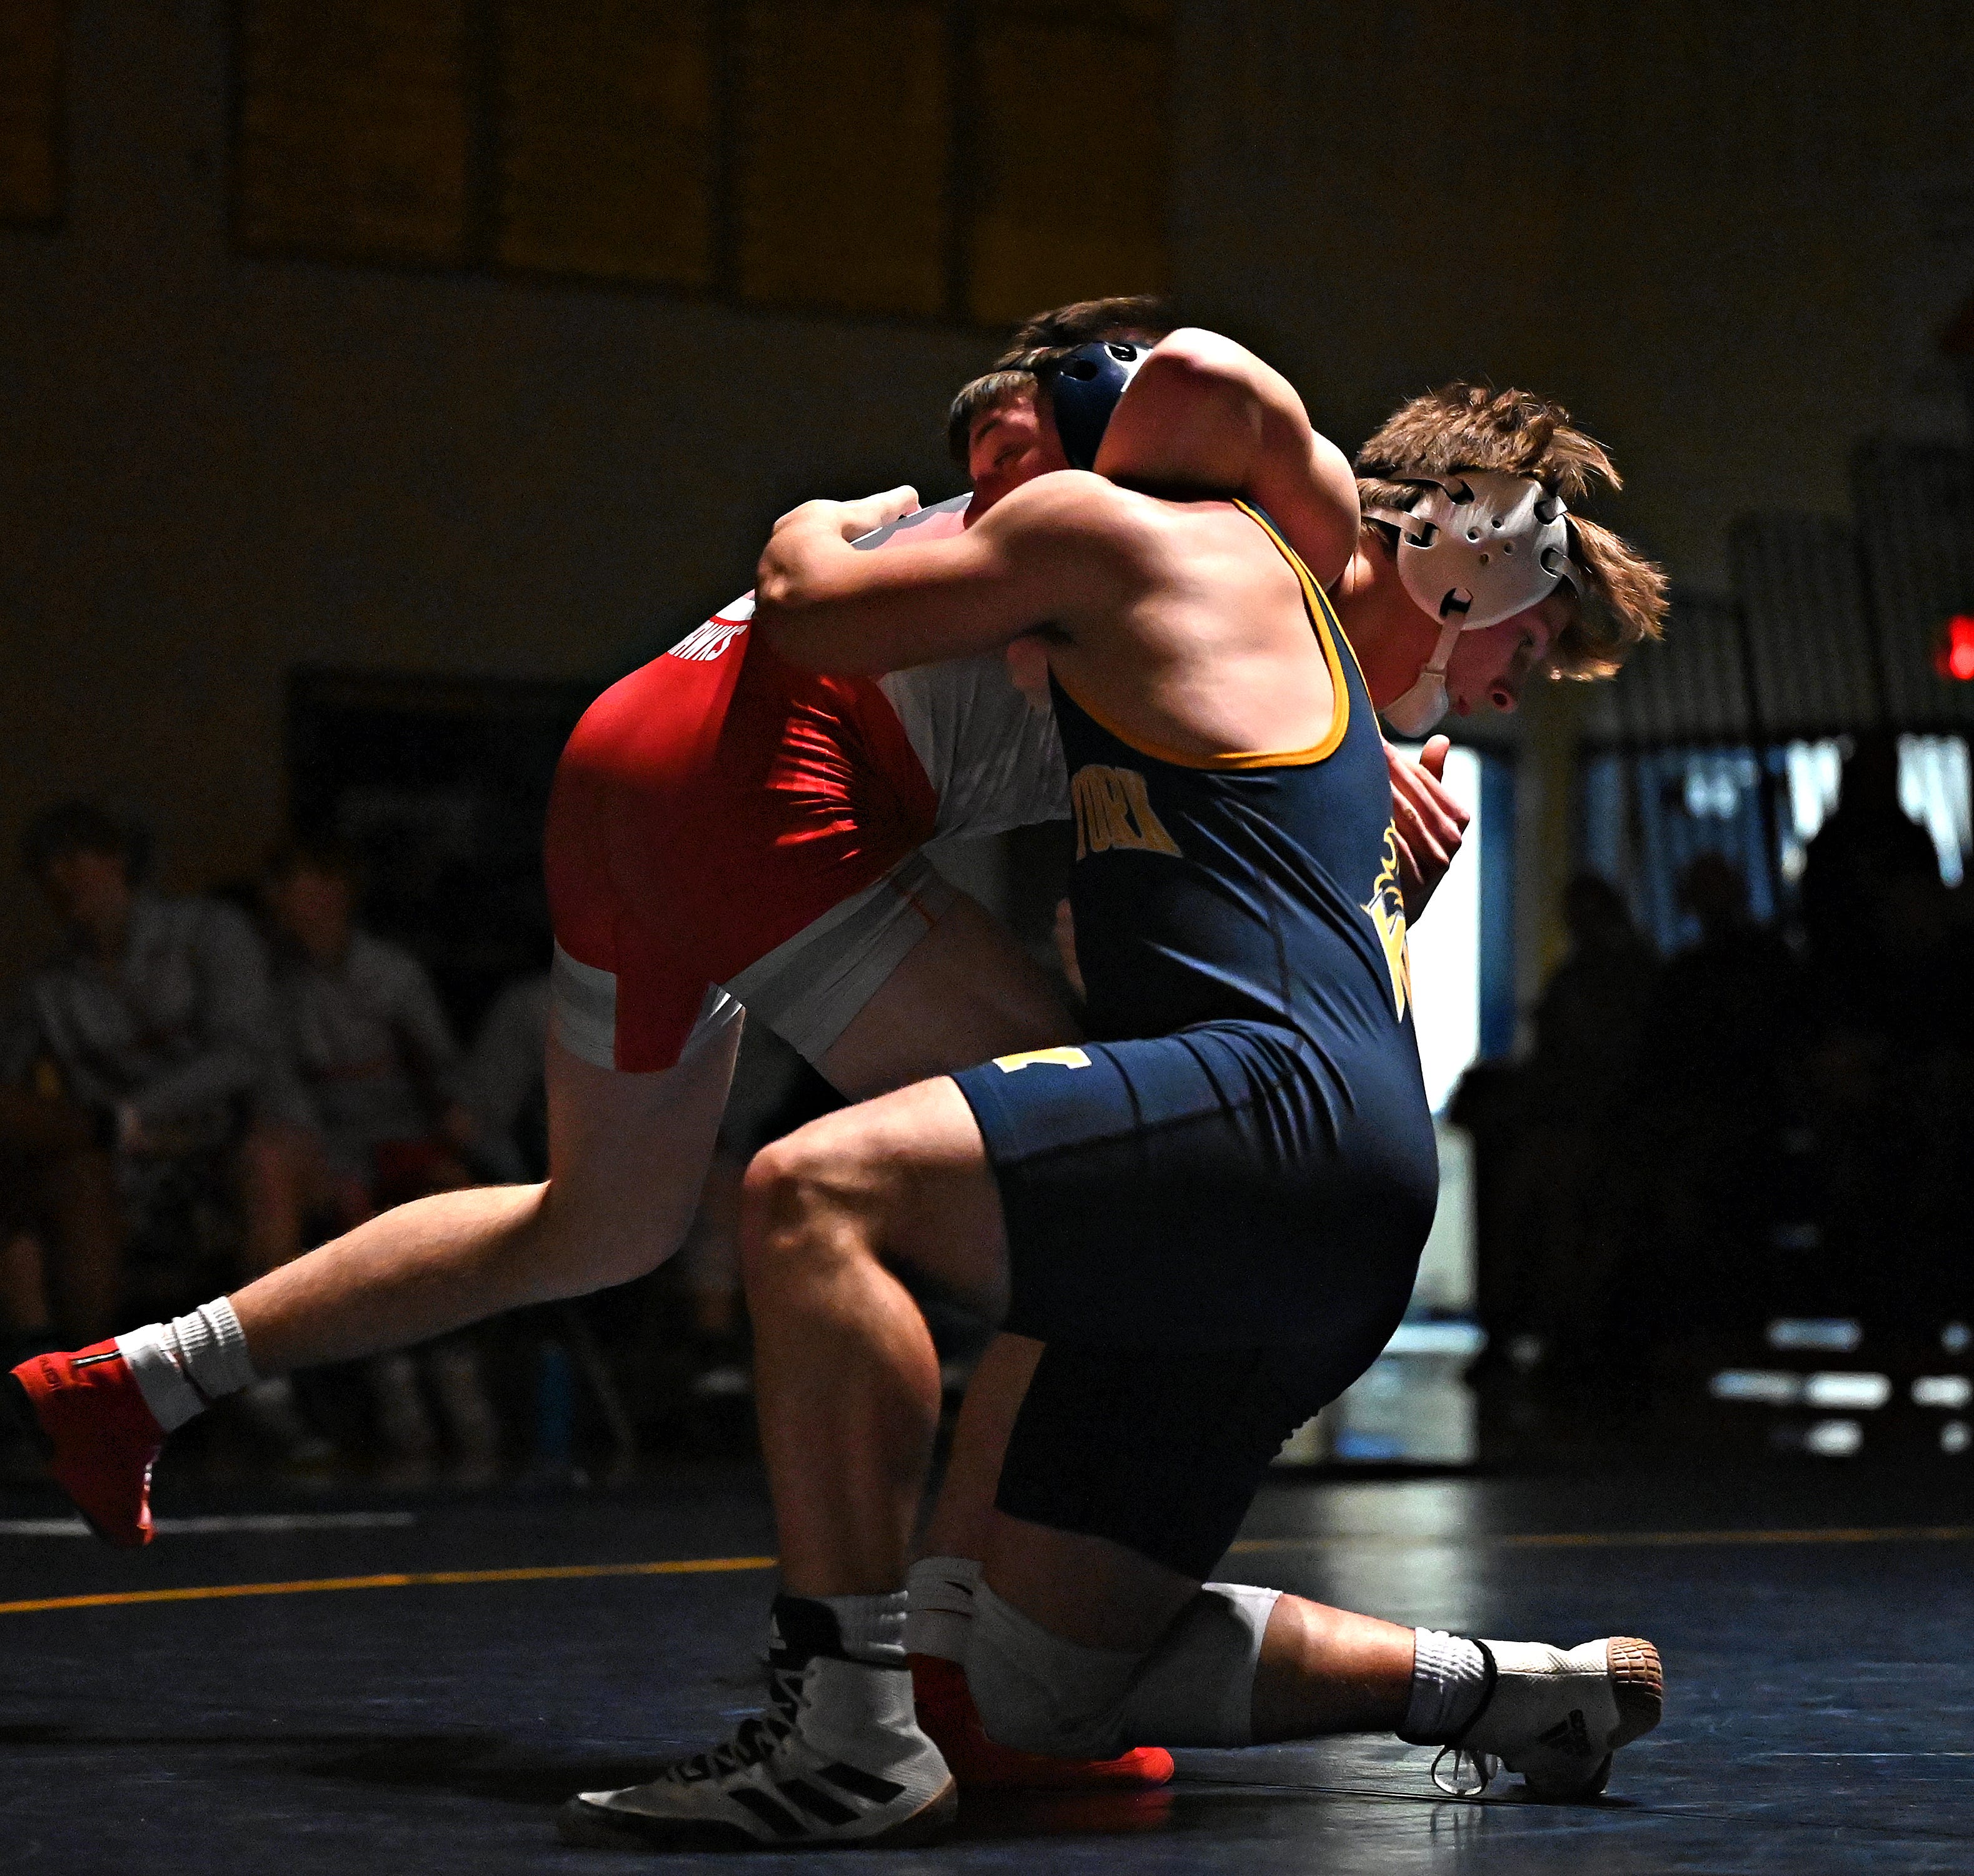 Eastern York’s Ethan Sgrignoli, front, and Hamburg’s Cohen Correll compete in the 172-pound weight class during PIAA District 3, Class 2-A first round wrestling action at Eastern York High School in Lower Windsor Township, Monday, Jan. 30, 2023. Correll would win the match and Eastern York would win the meet 50-22. Dawn J. Sagert photo